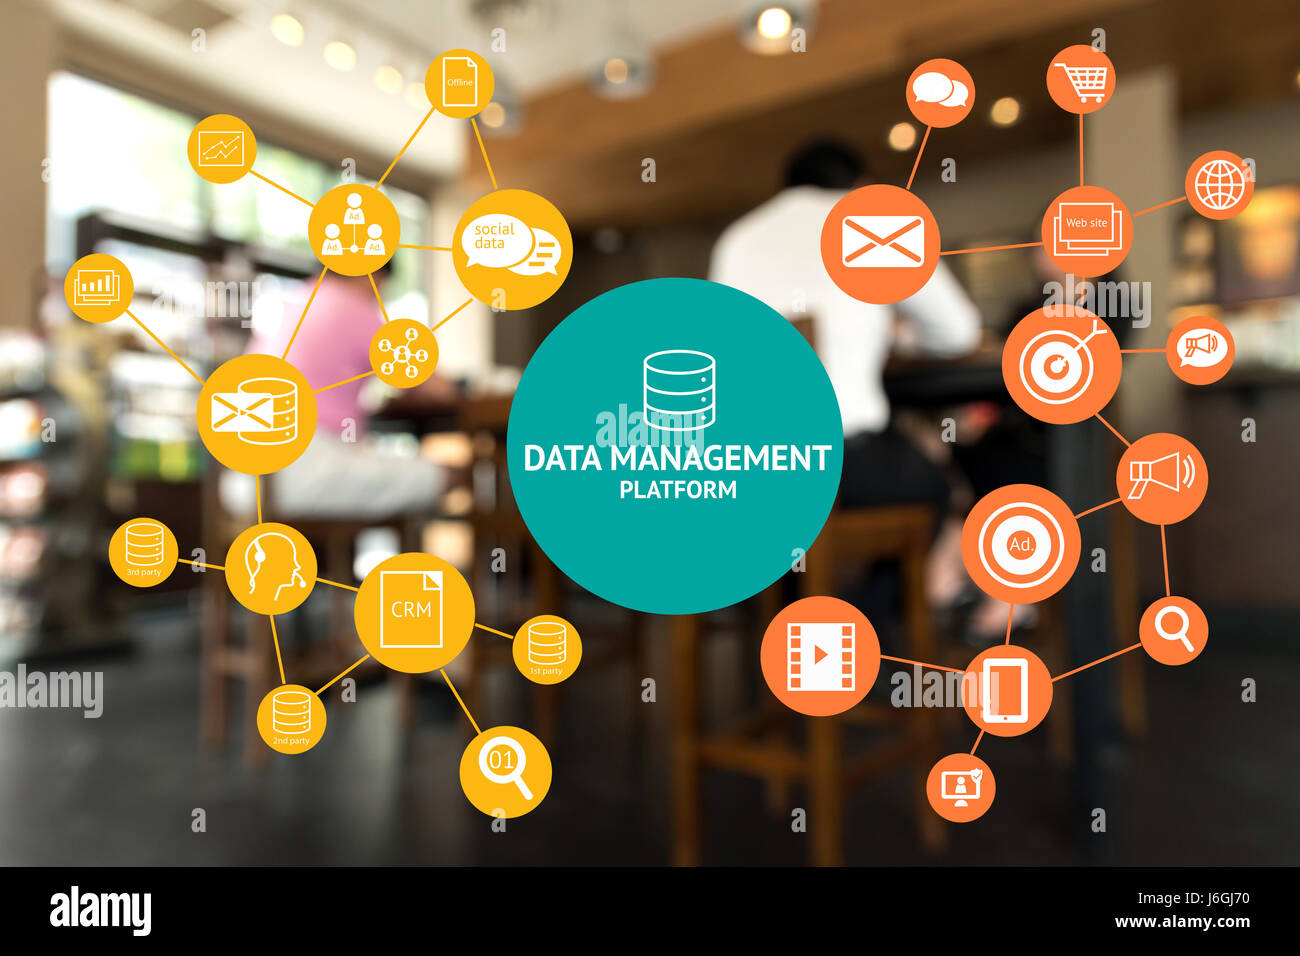 Data Management Platform (DMP) , Marketing and crm concept. Infographic , texts and icons on coffee retail shop background. Stock Photo